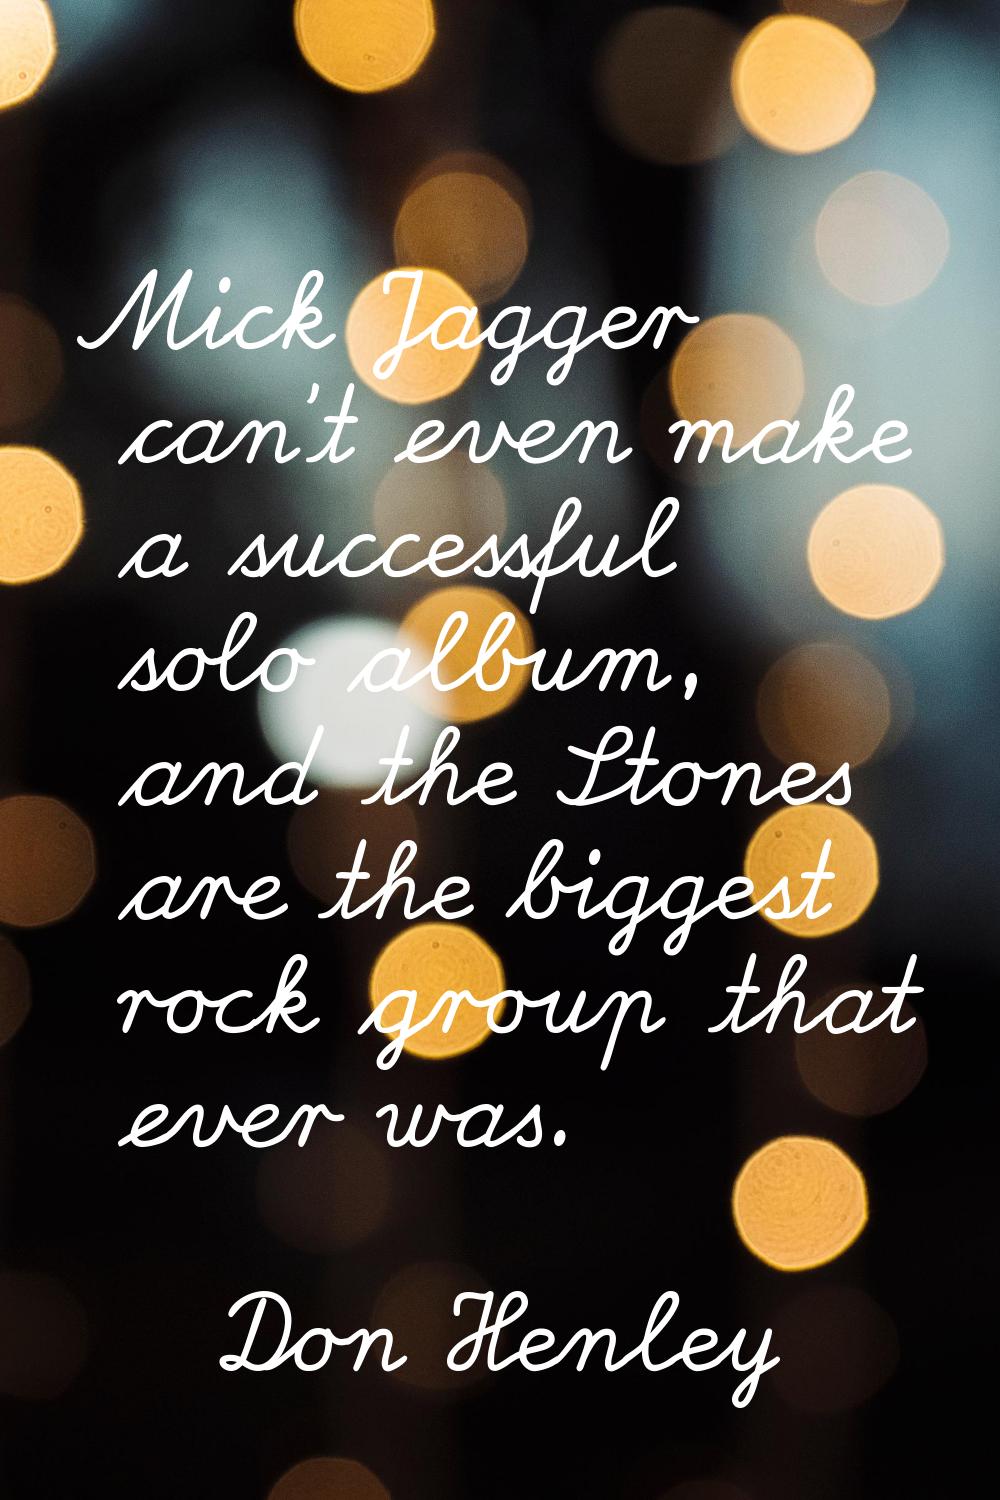 Mick Jagger can't even make a successful solo album, and the Stones are the biggest rock group that